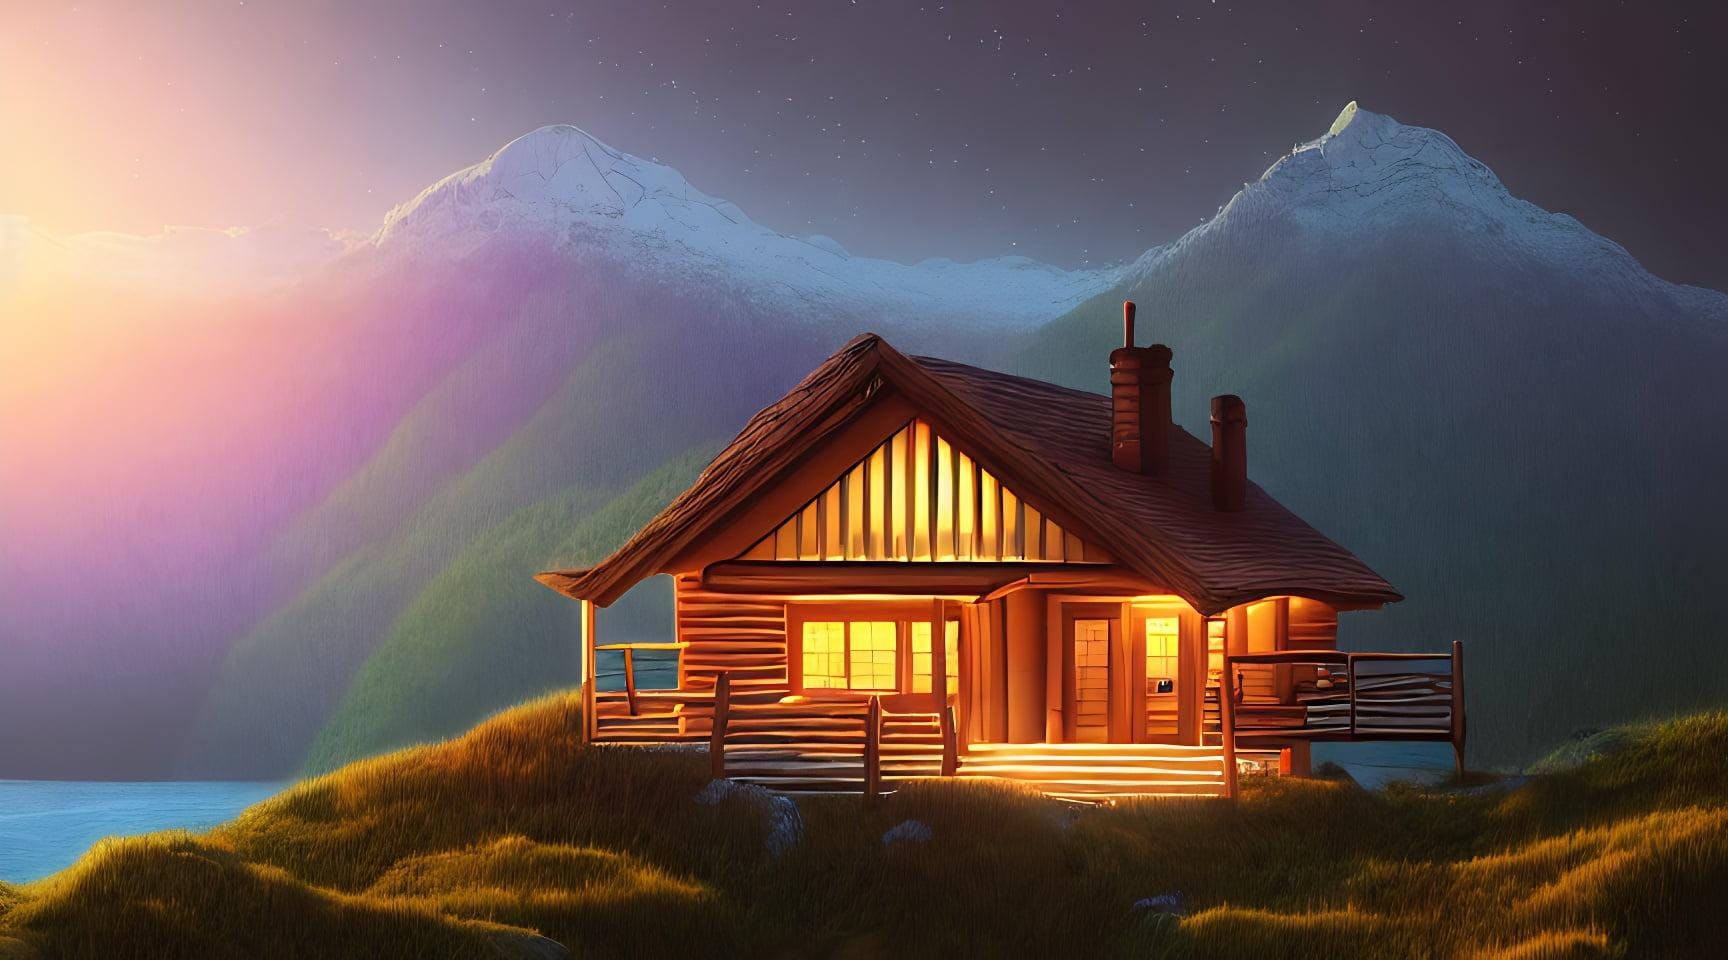 Digital illustration of a cozy cabin in the mountains